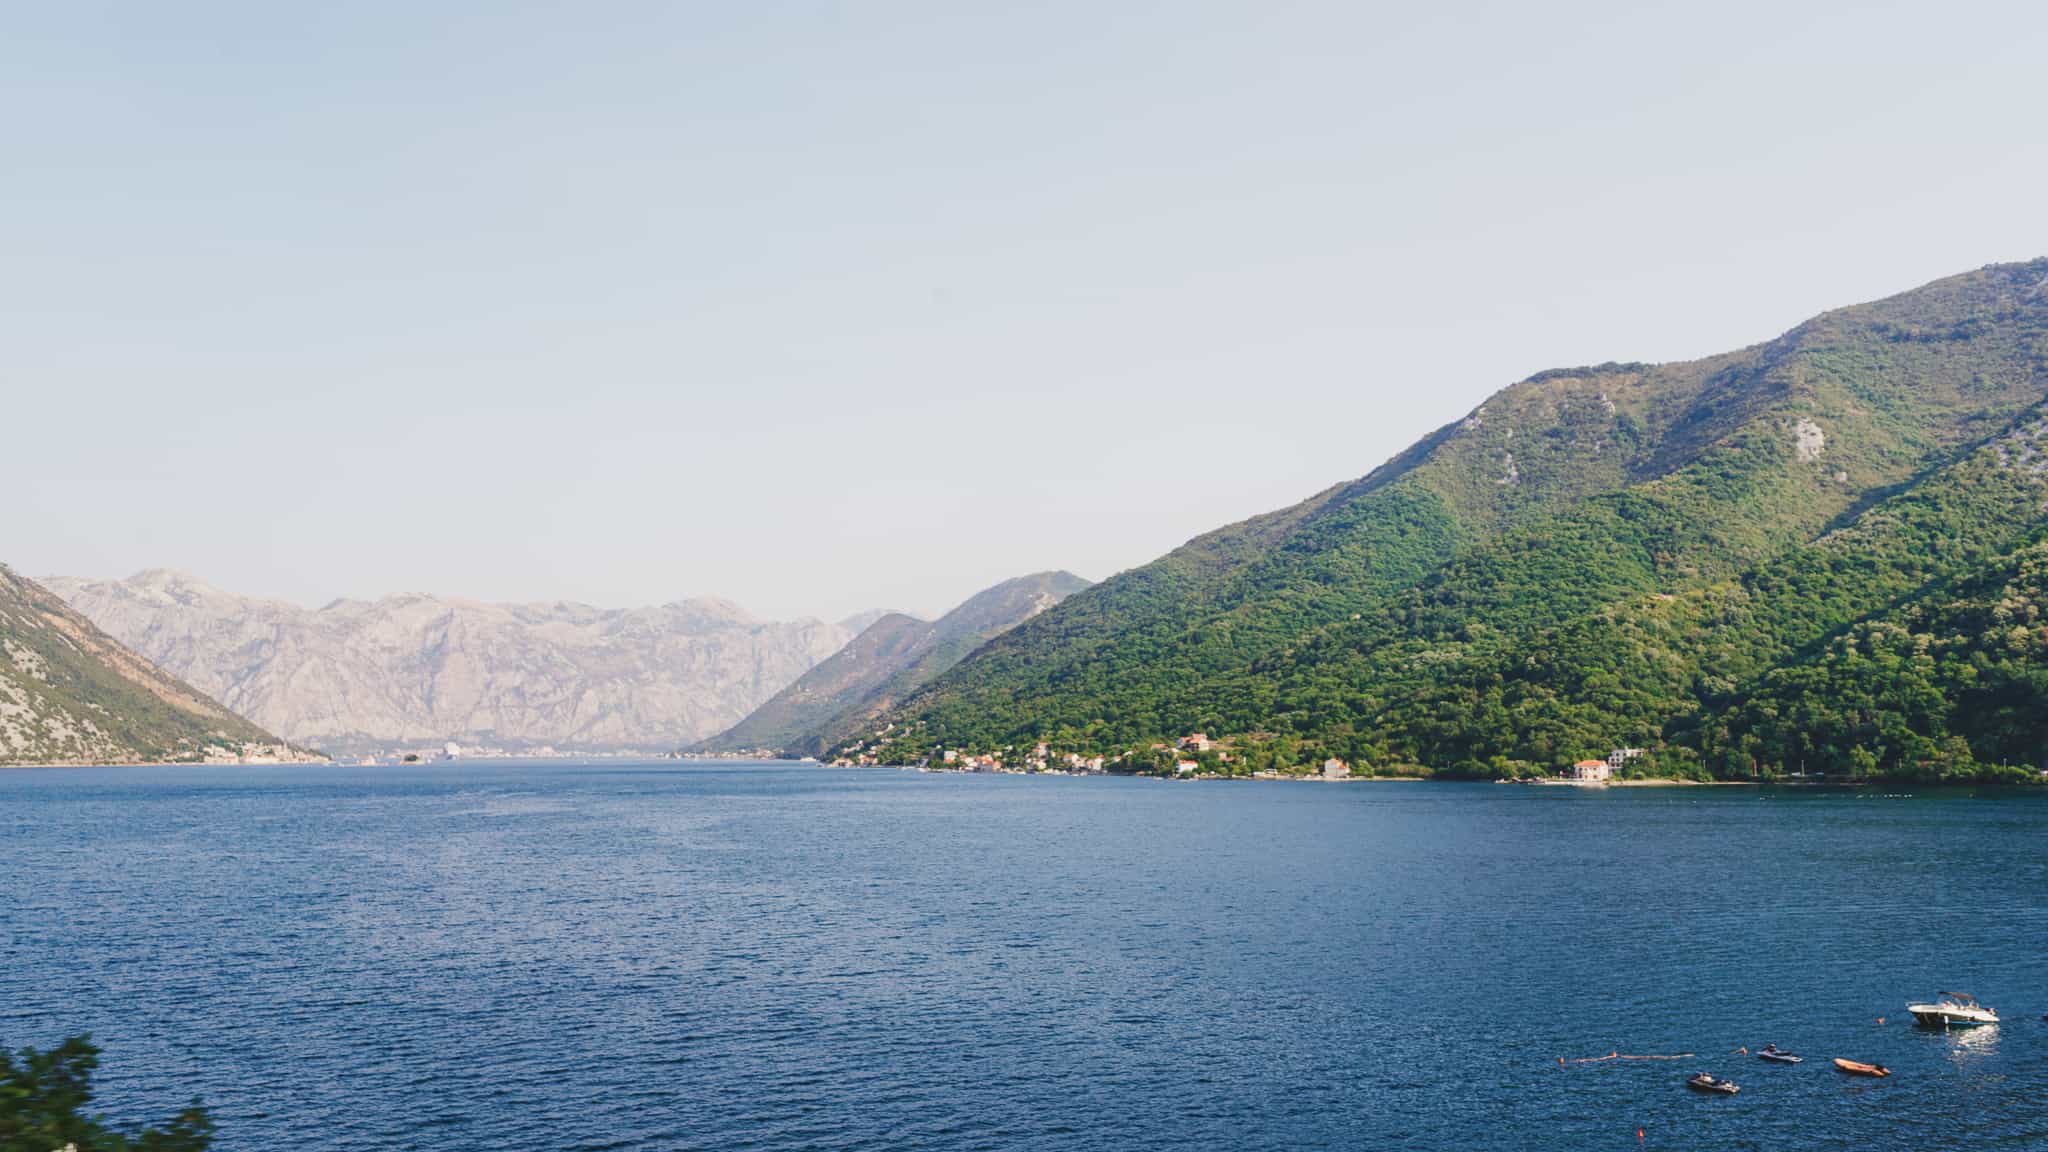 Daytime shot of the Bay of Kotor and its surrounding hills and mountains of Montenegro